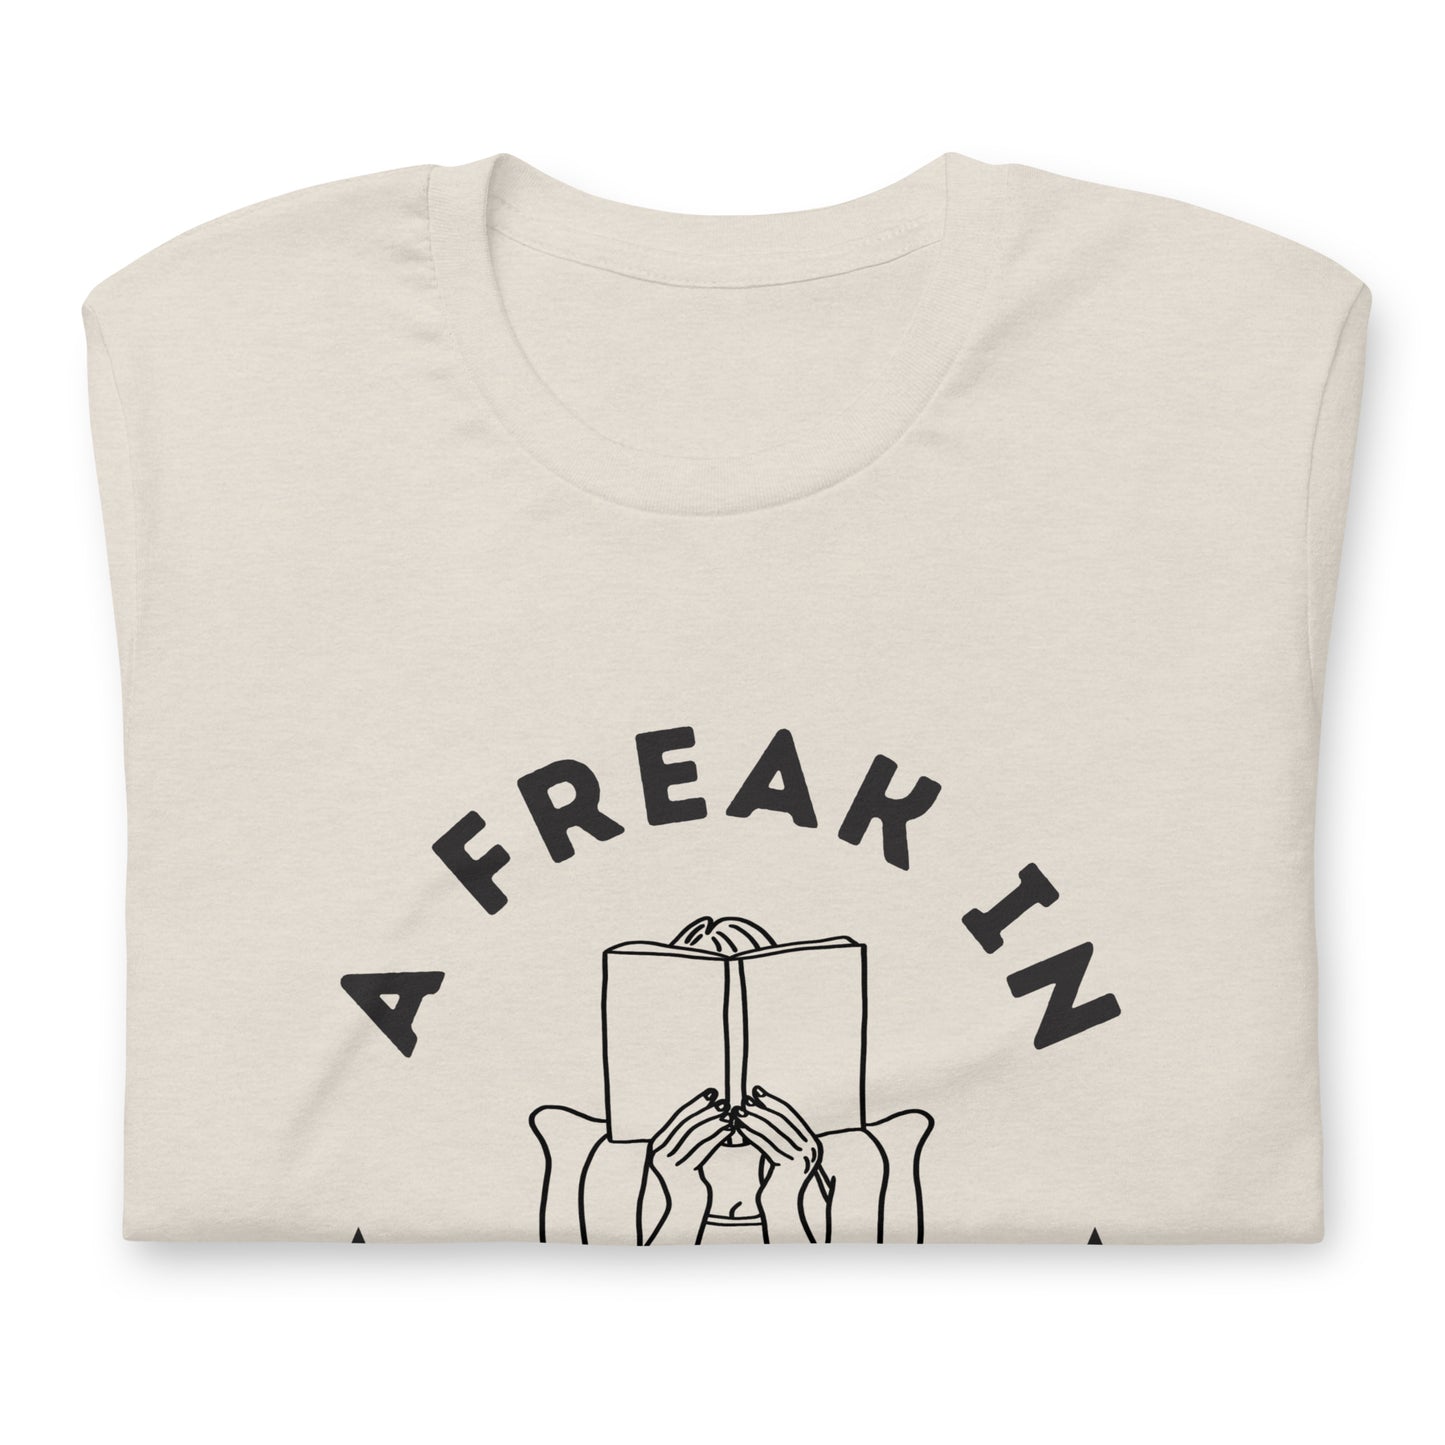 A Freak In The Sheets Romance Book Tee